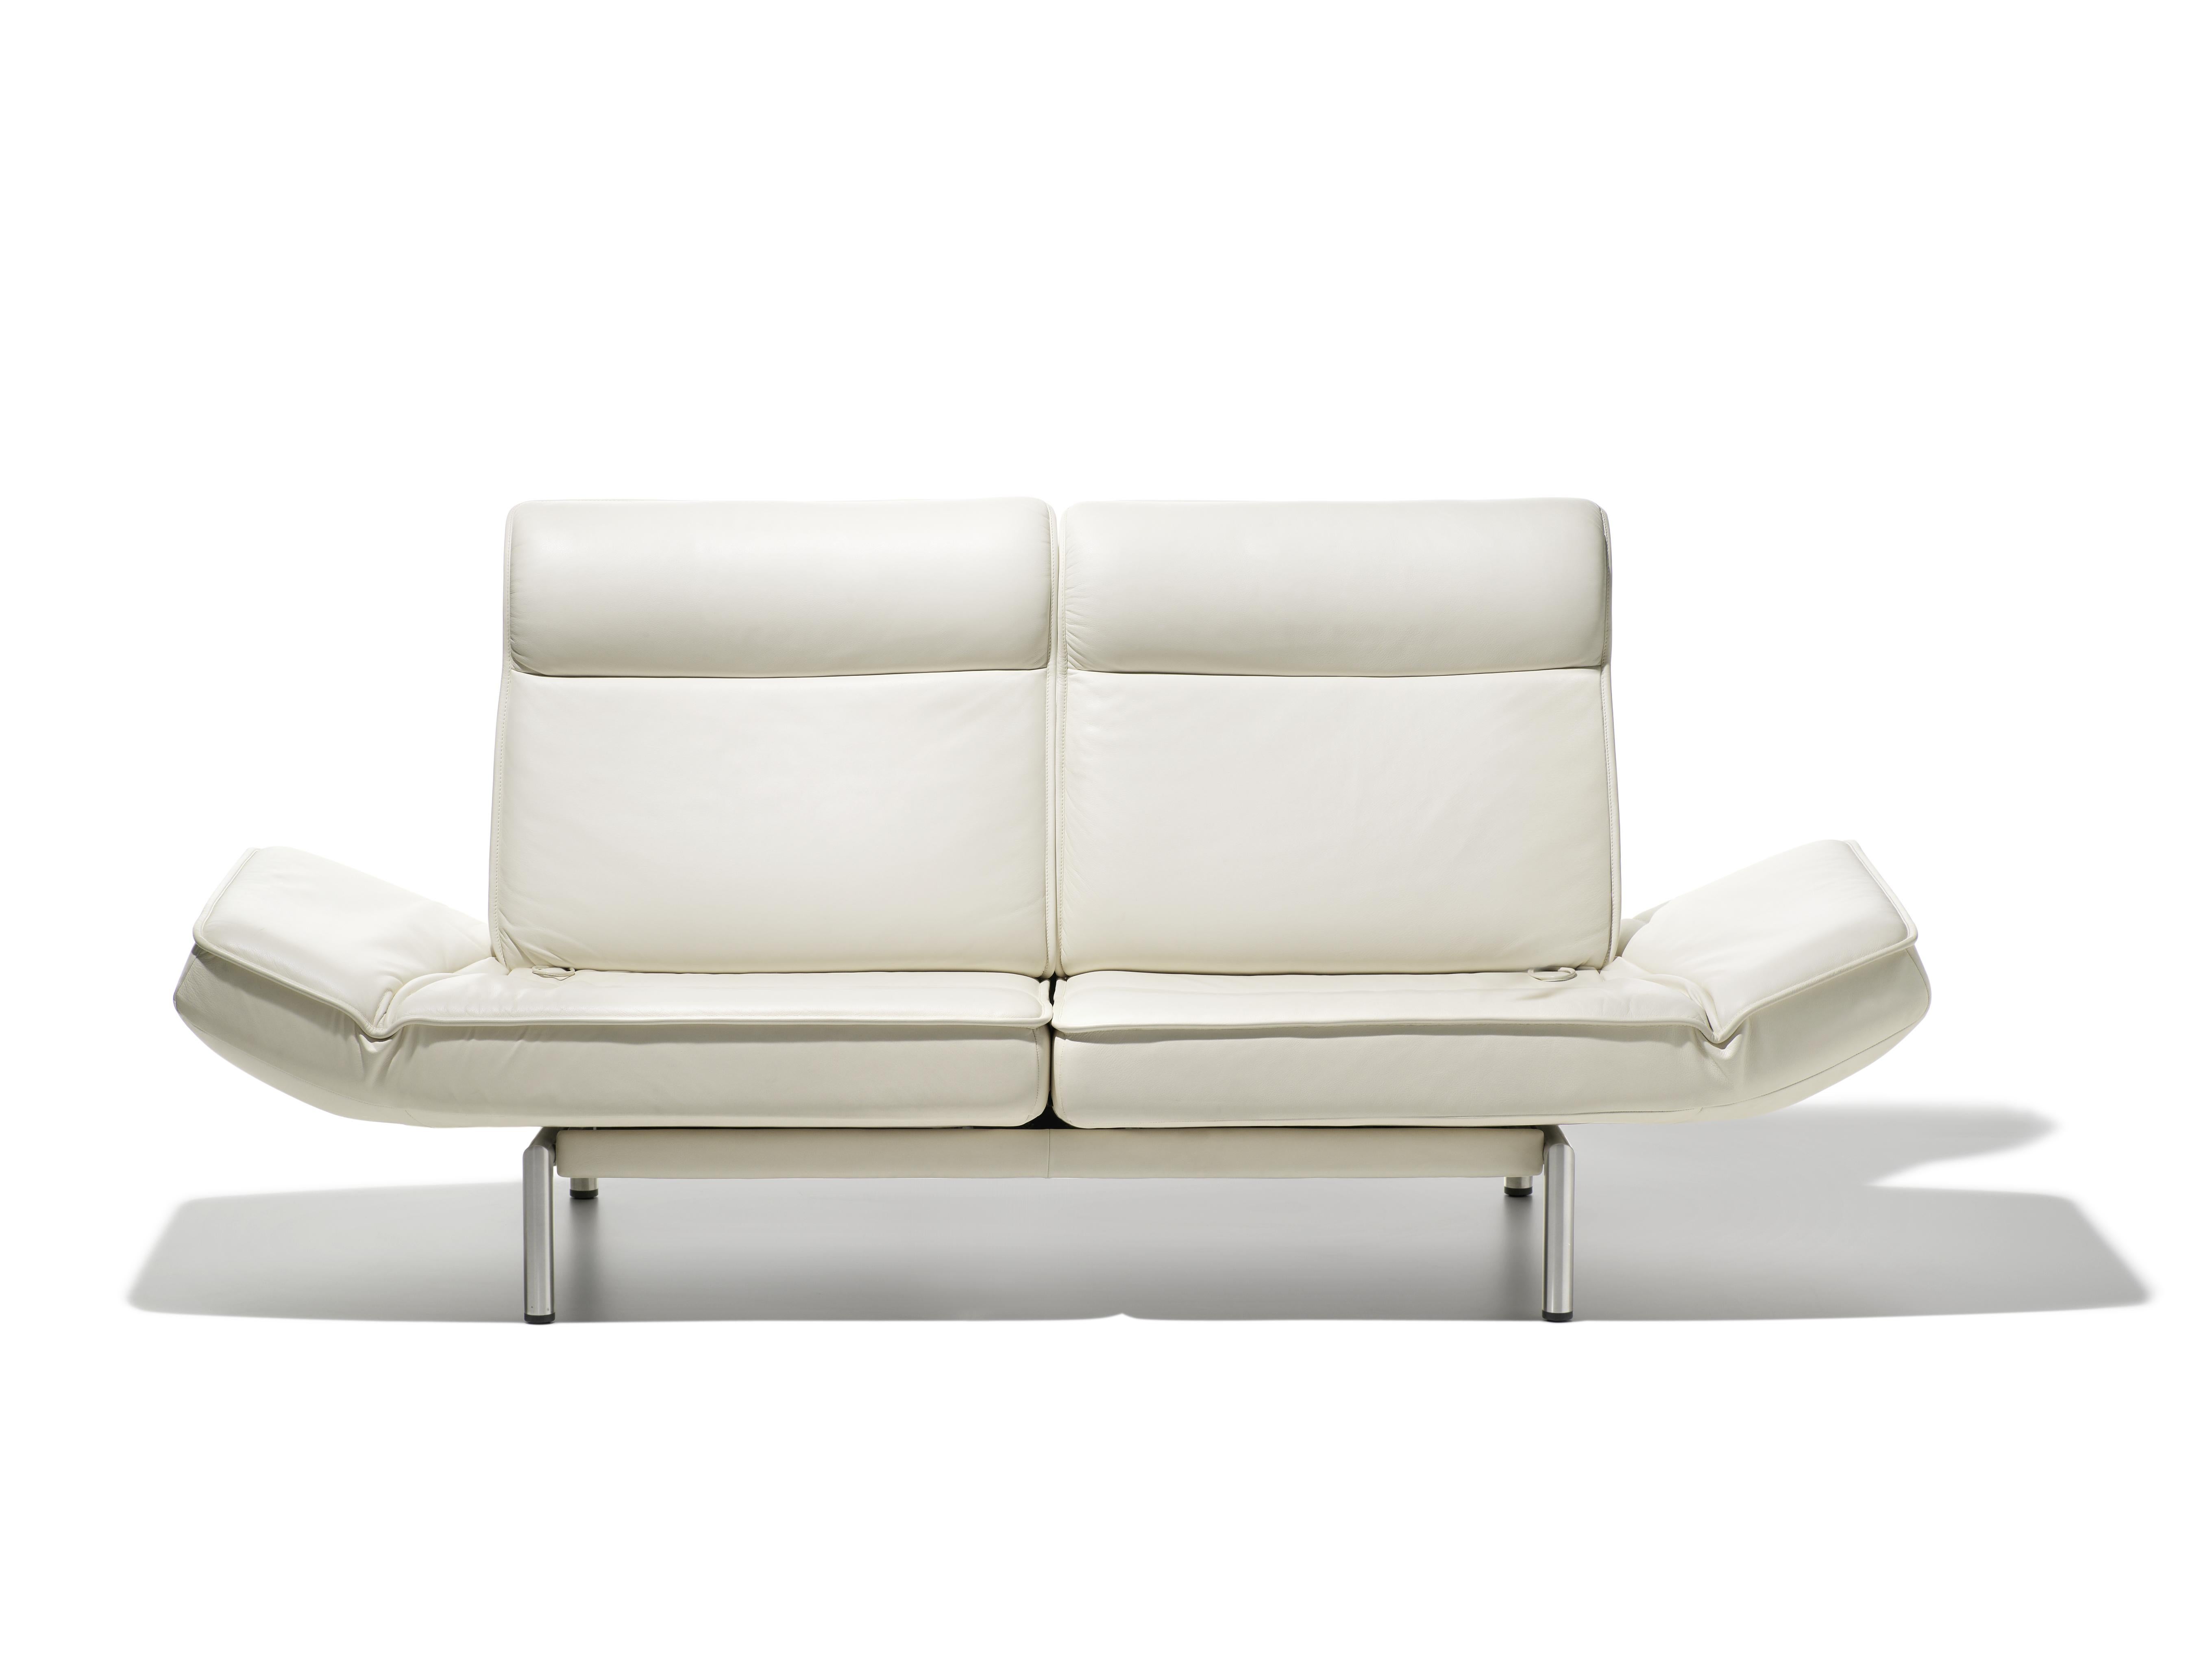 DS-450 sofa by De Sede
Design: Thomas Althaus
Dimensions: D 54 x W 233 x H 97 cm
Materials: steel, leather

Prices may change according to the chosen materials and size. 

A miracle of brilliant technical inspiration

Designer Thomas